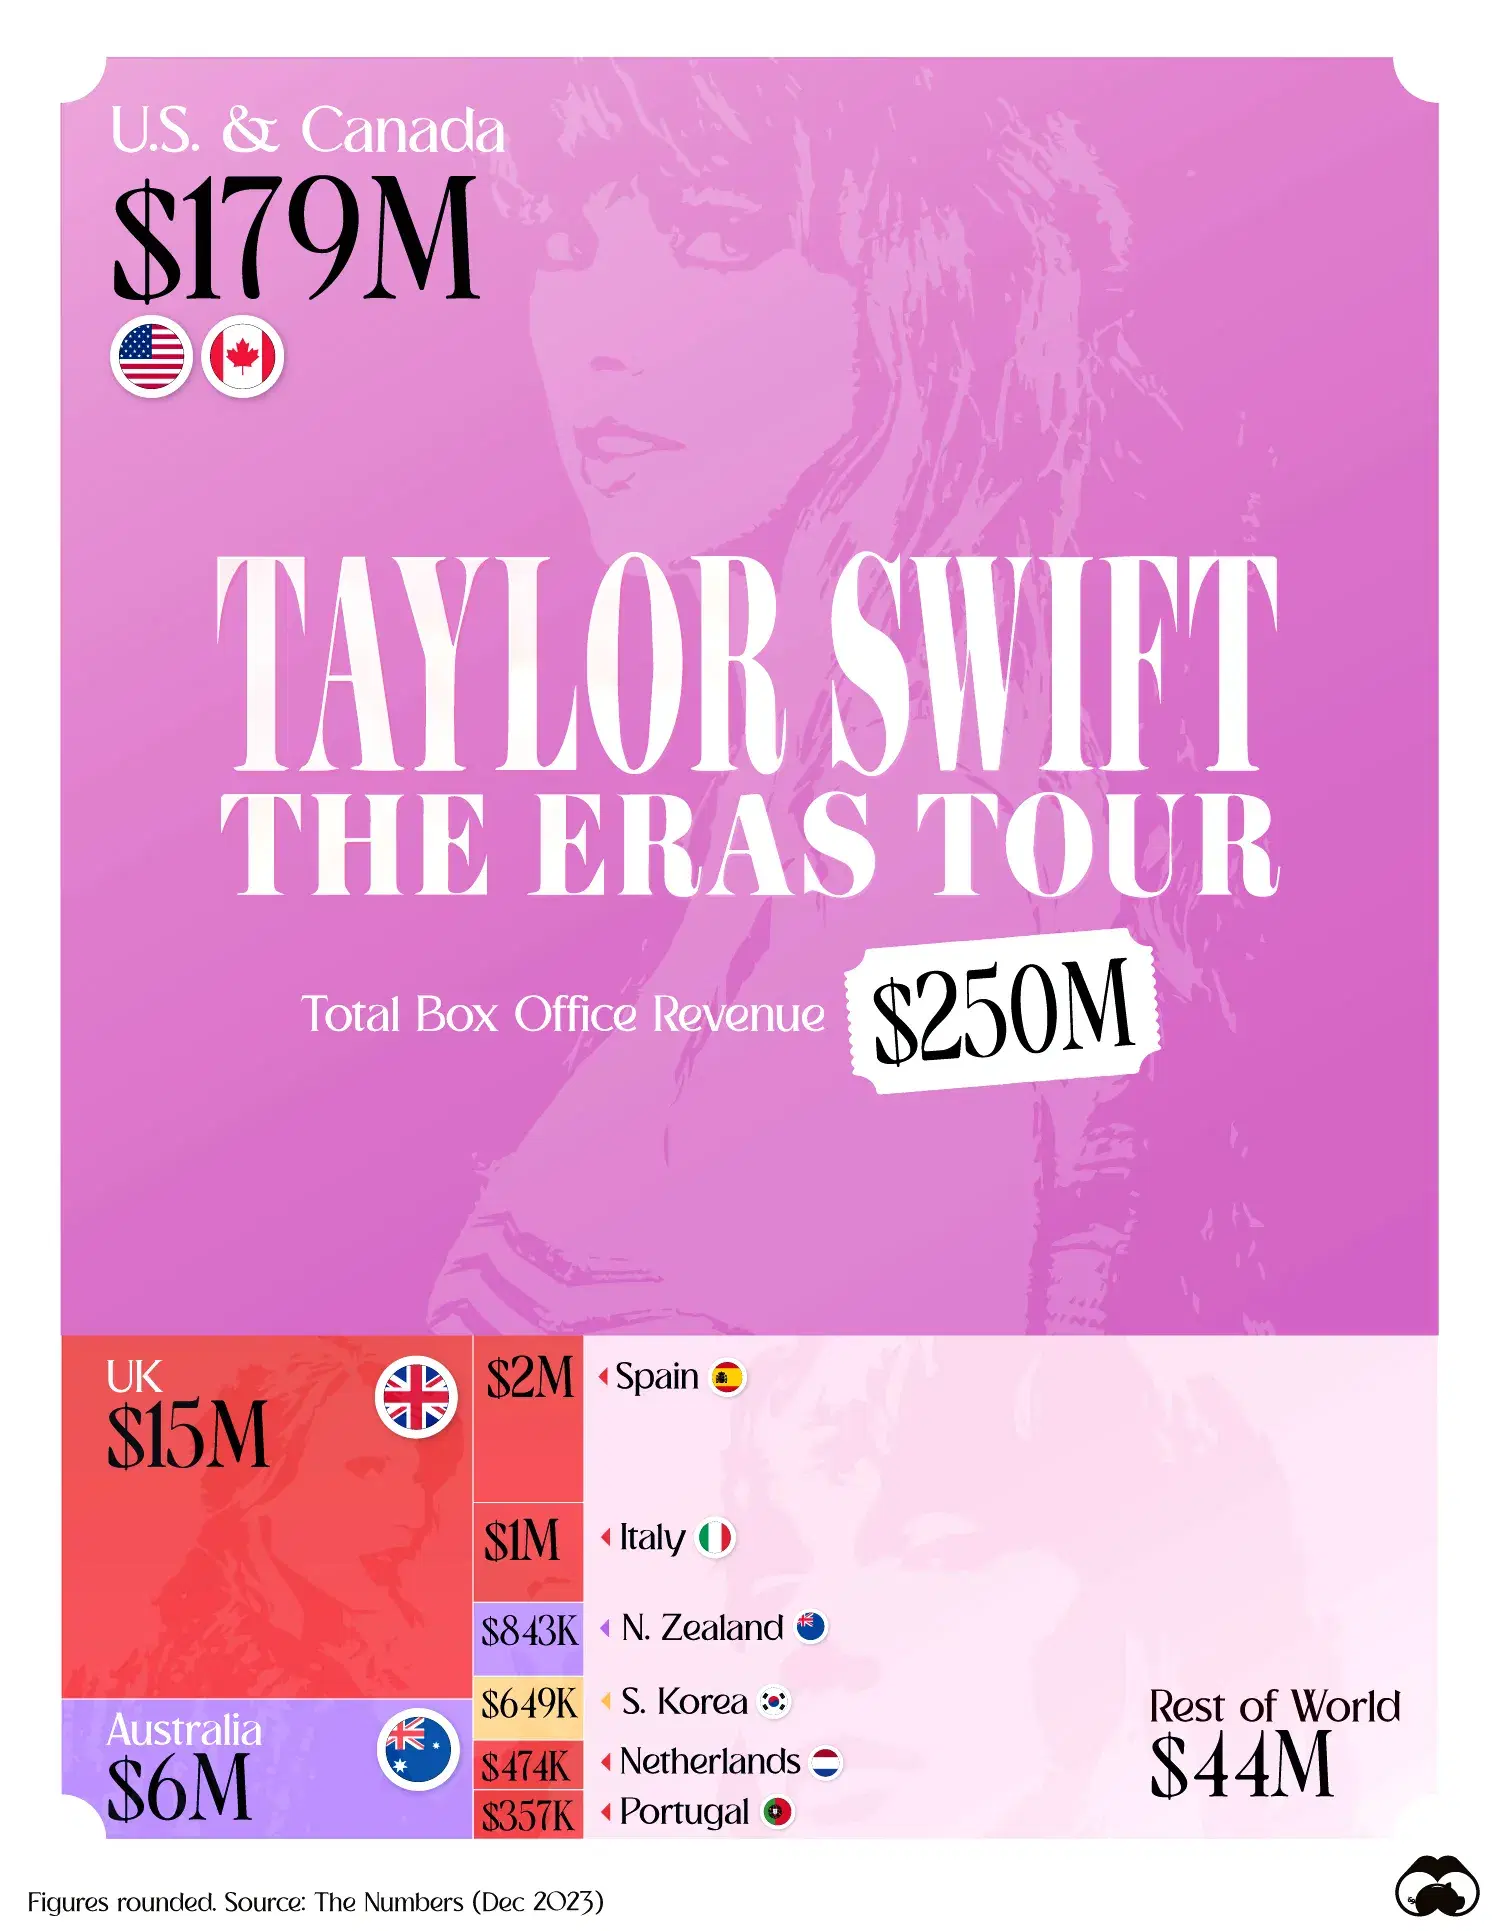 "Taylor Swift: The Eras Tour" Has Made $250M in Box Office Revenue 🟪☁️